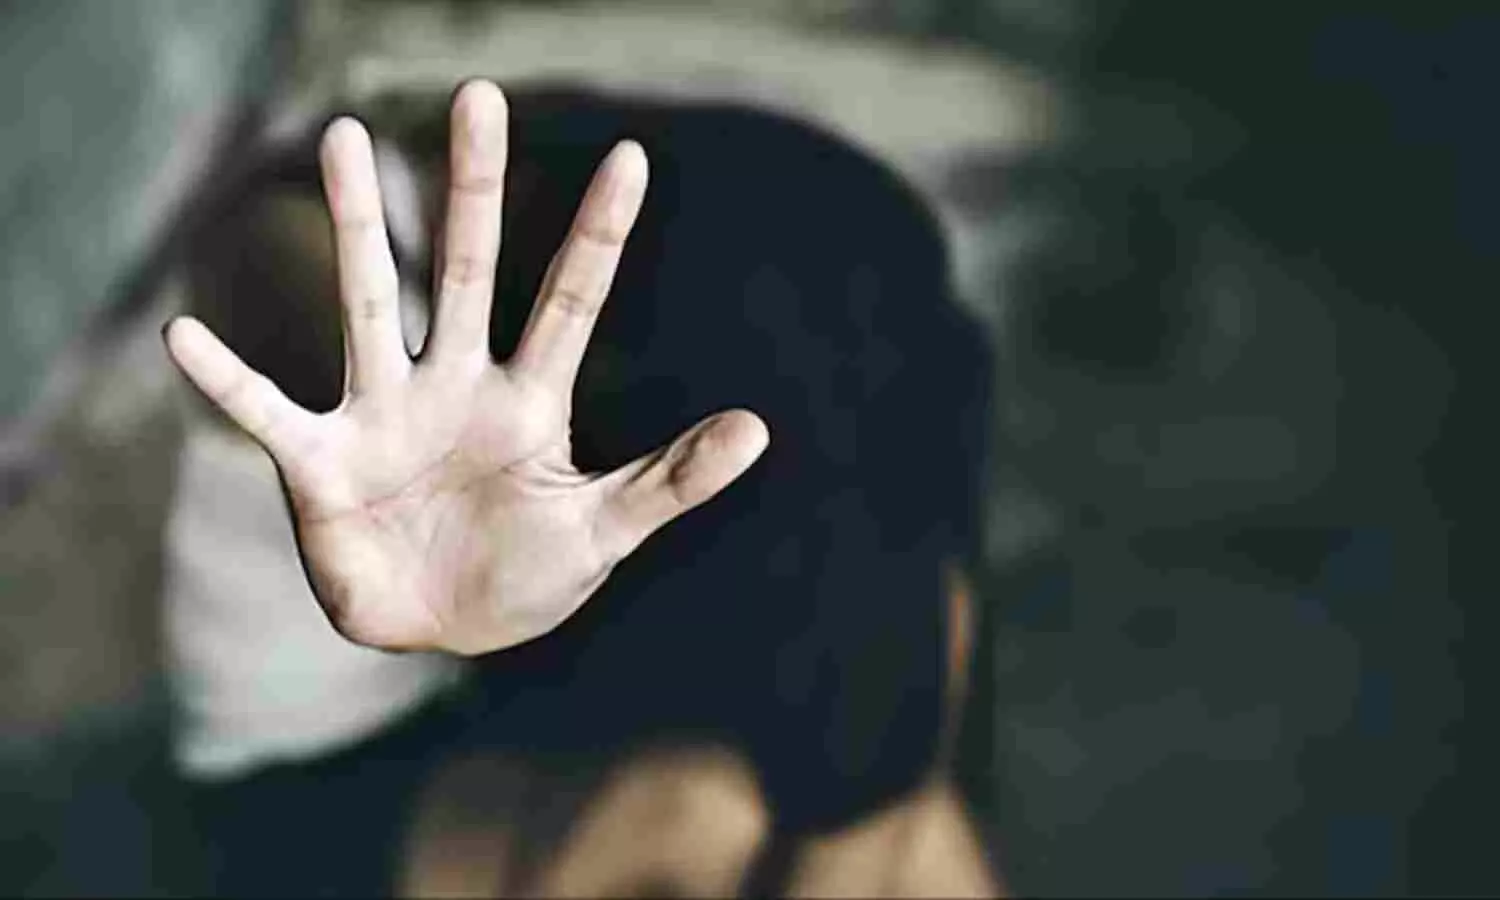 Father raped minor daughter